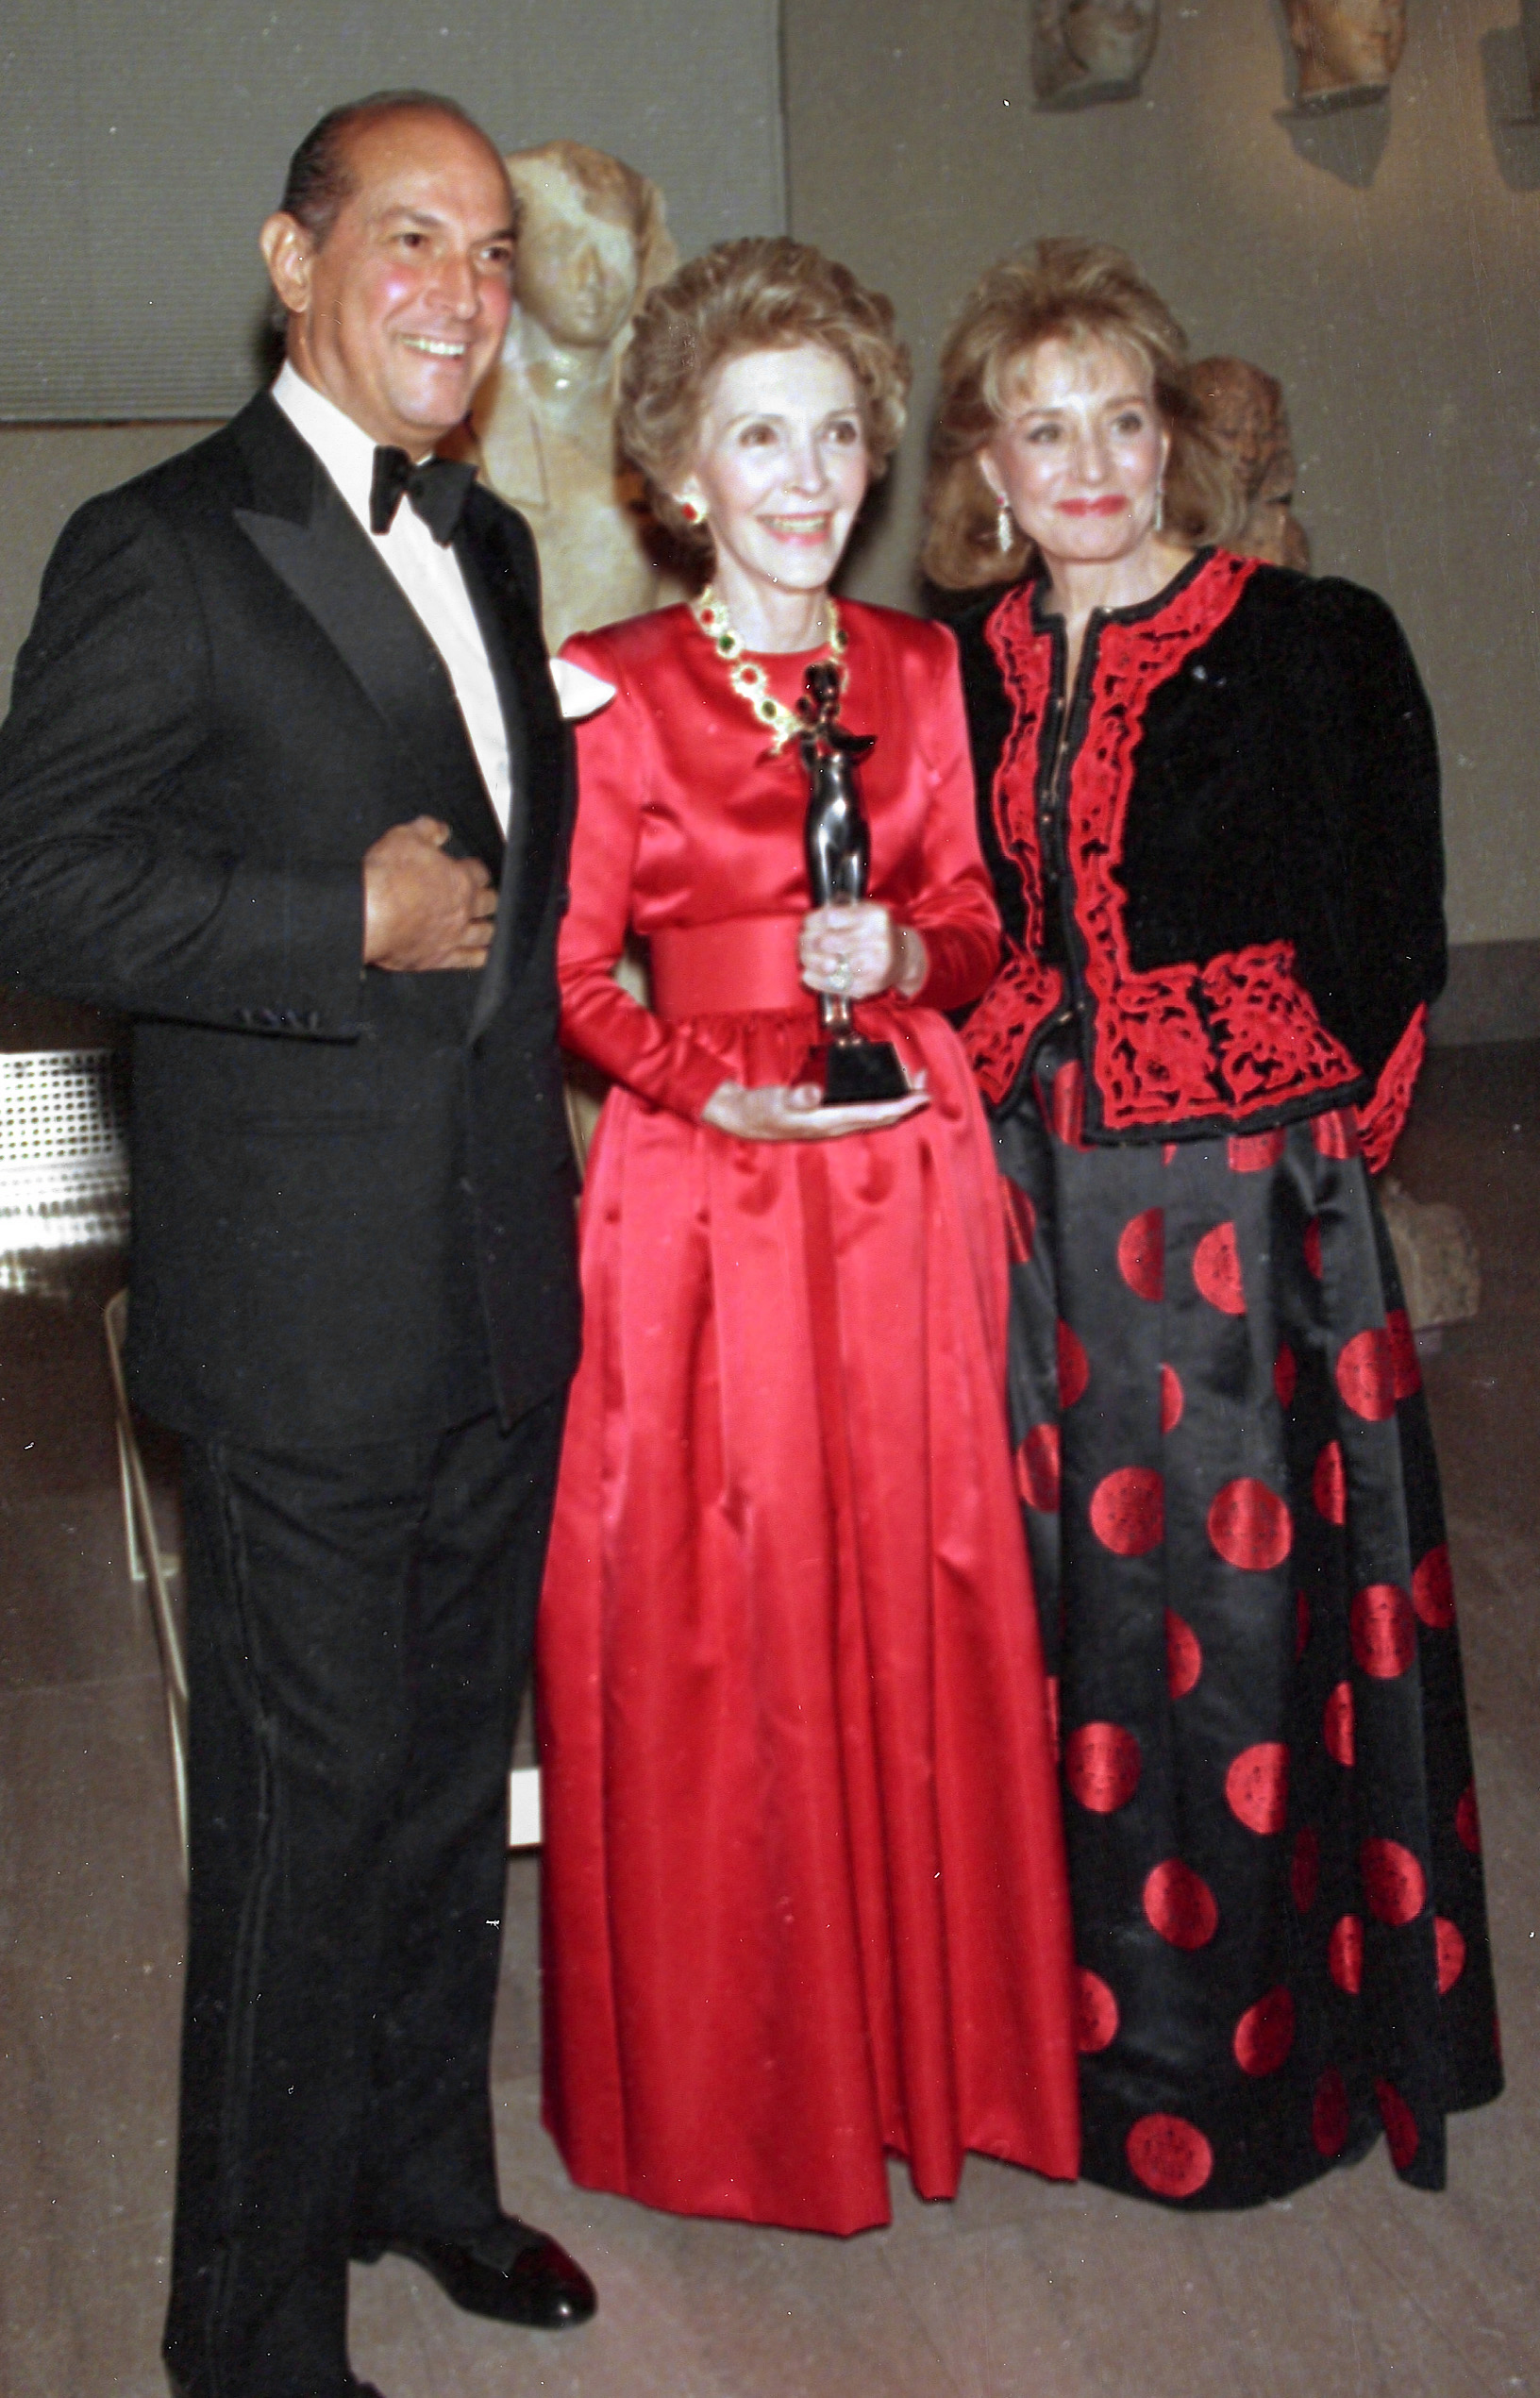 Oscar de la Renta and Barbara Walters posing with former first lady Nancy Reagan at the Metropolitan Museum of Art in New York, where the first lady was awarded the Council of Fashion Designers of America's Lifetime Achievement Award for her contributions to fashion on Jan. 10, 1989.